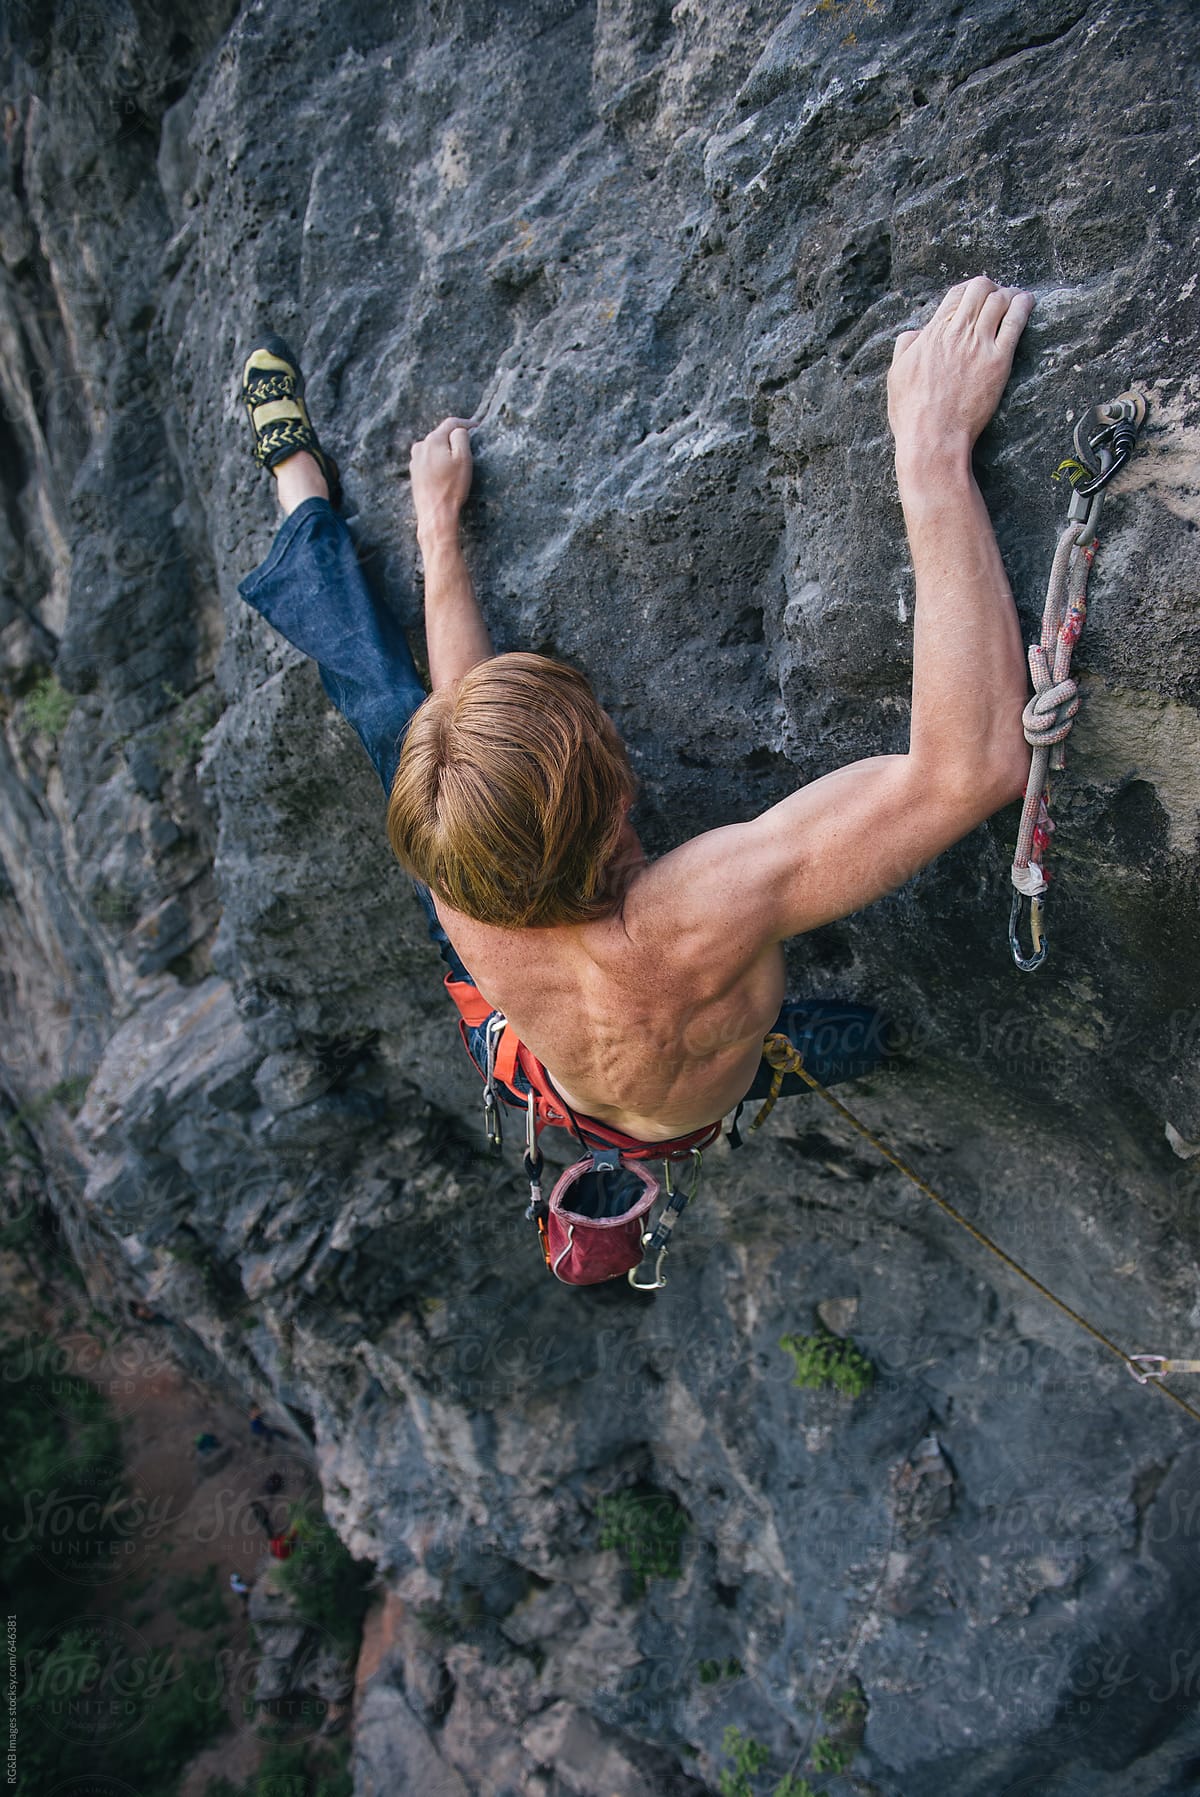 Male climber using his heel to hold on the rock